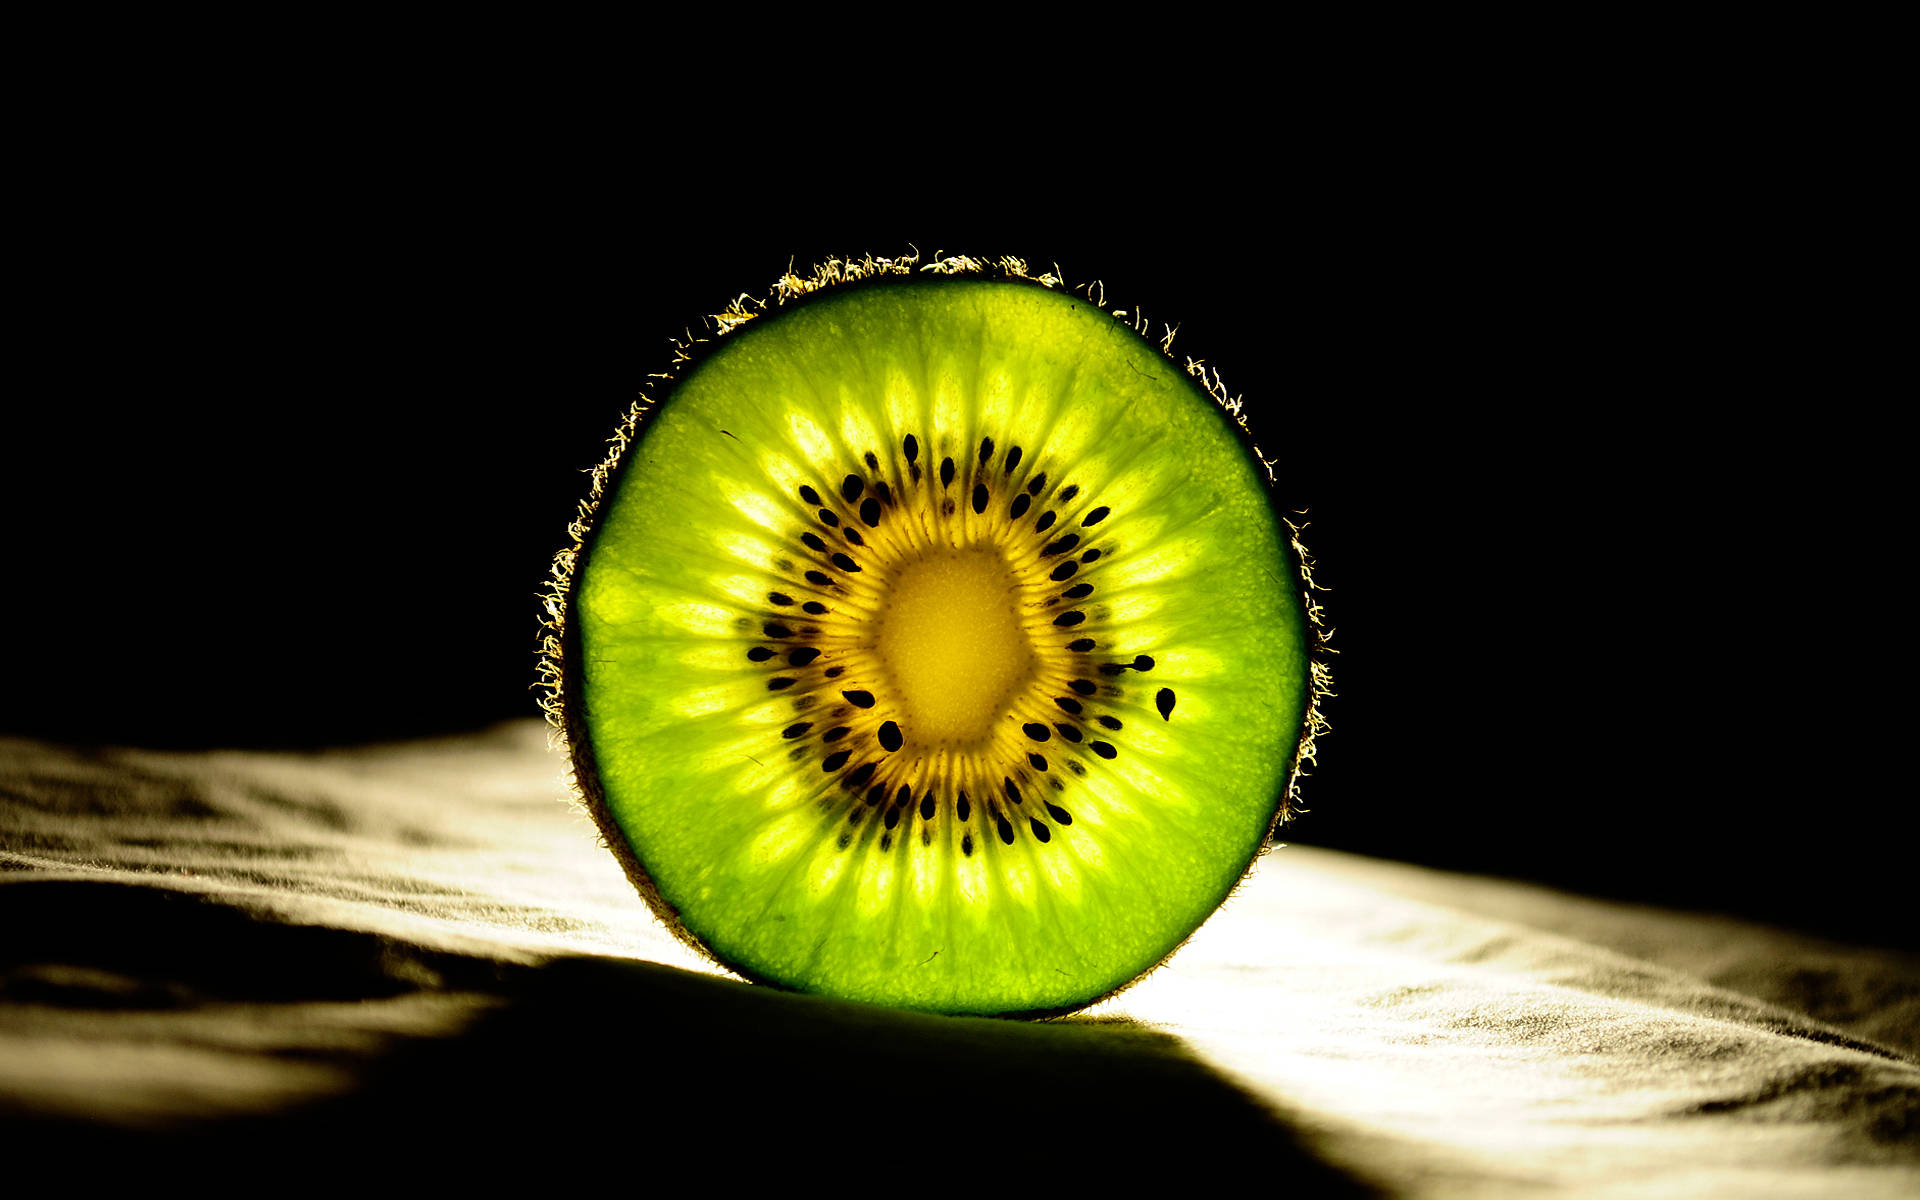 Close-up Photography Shot Of A Slice Of Kiwi With Fascinating Light Design Sourced From The Background